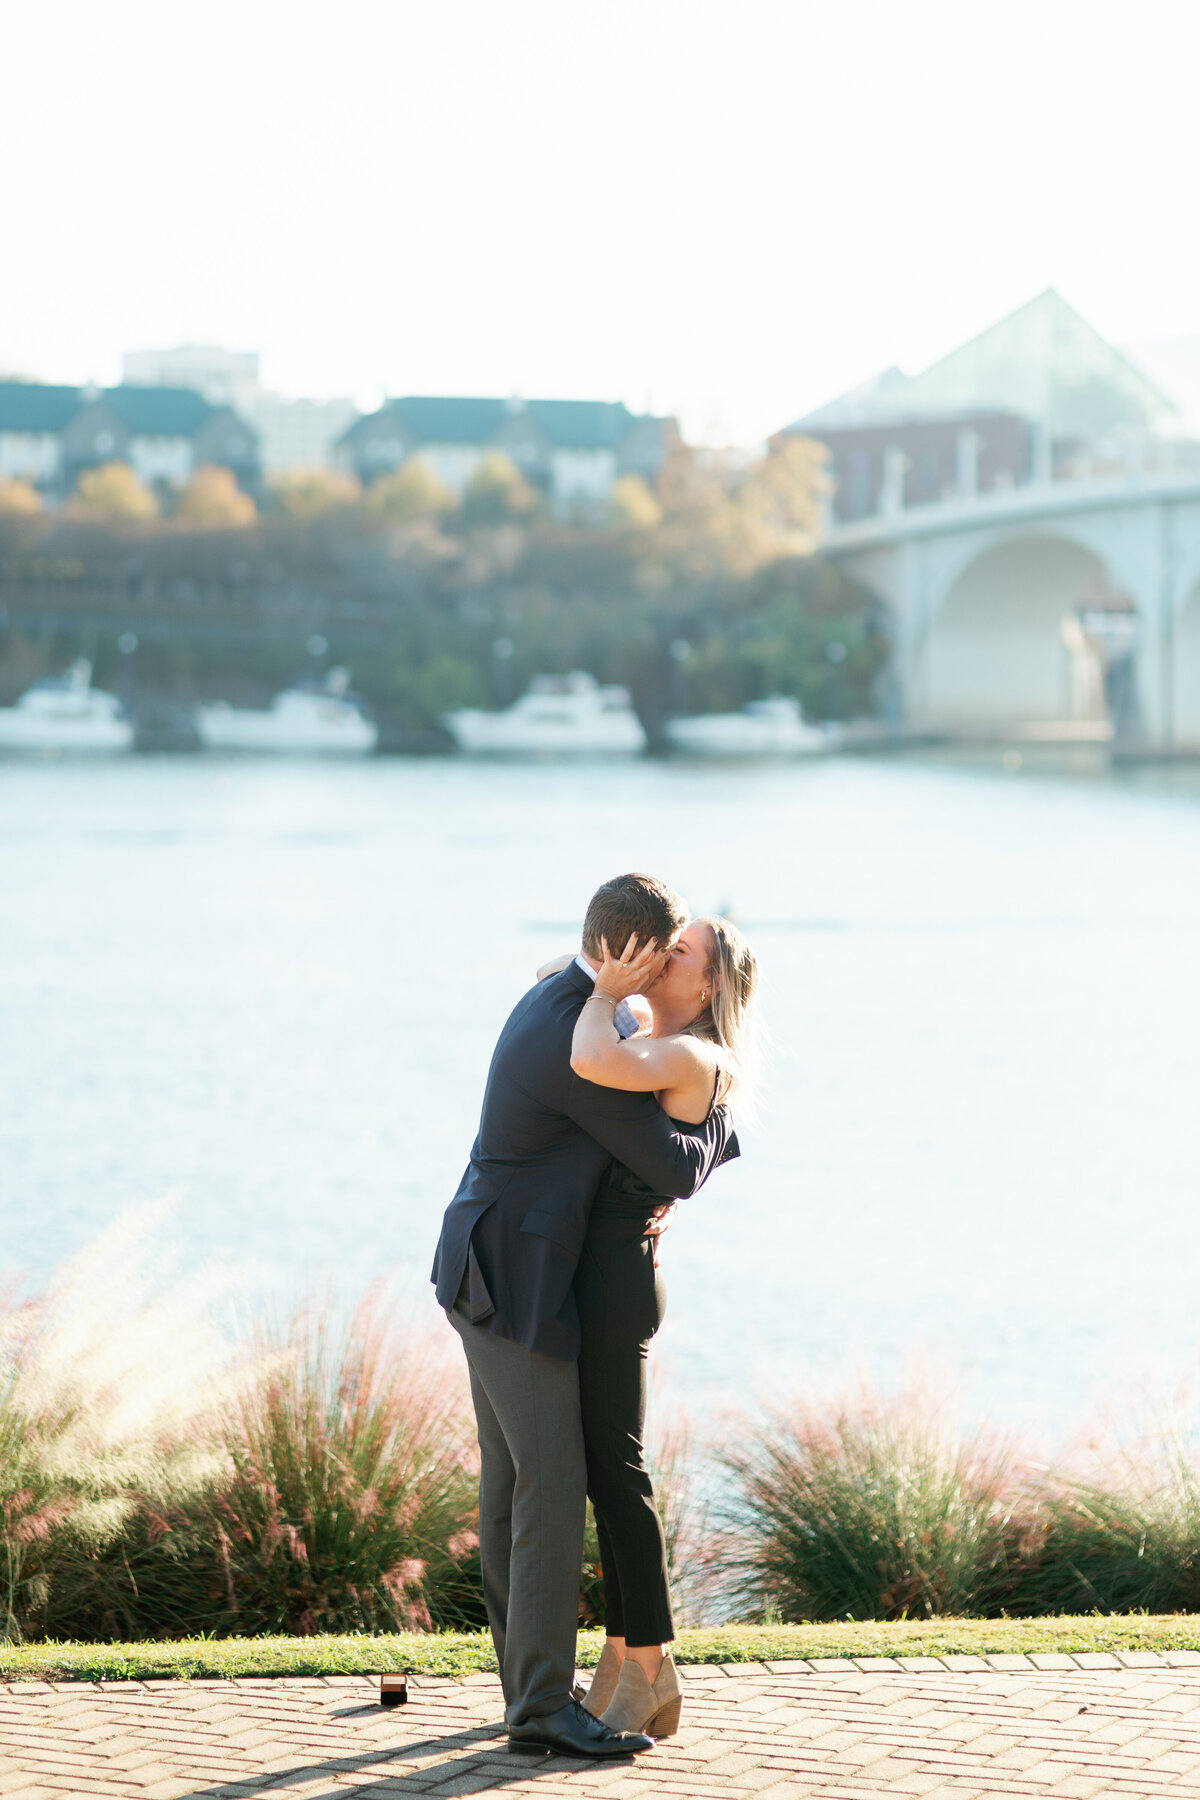 Wesley and Ellie Proposal - Coolidge Park, Chattanooga Tennessee - World Wide Engagement Photographer - Alaina René Photography-14